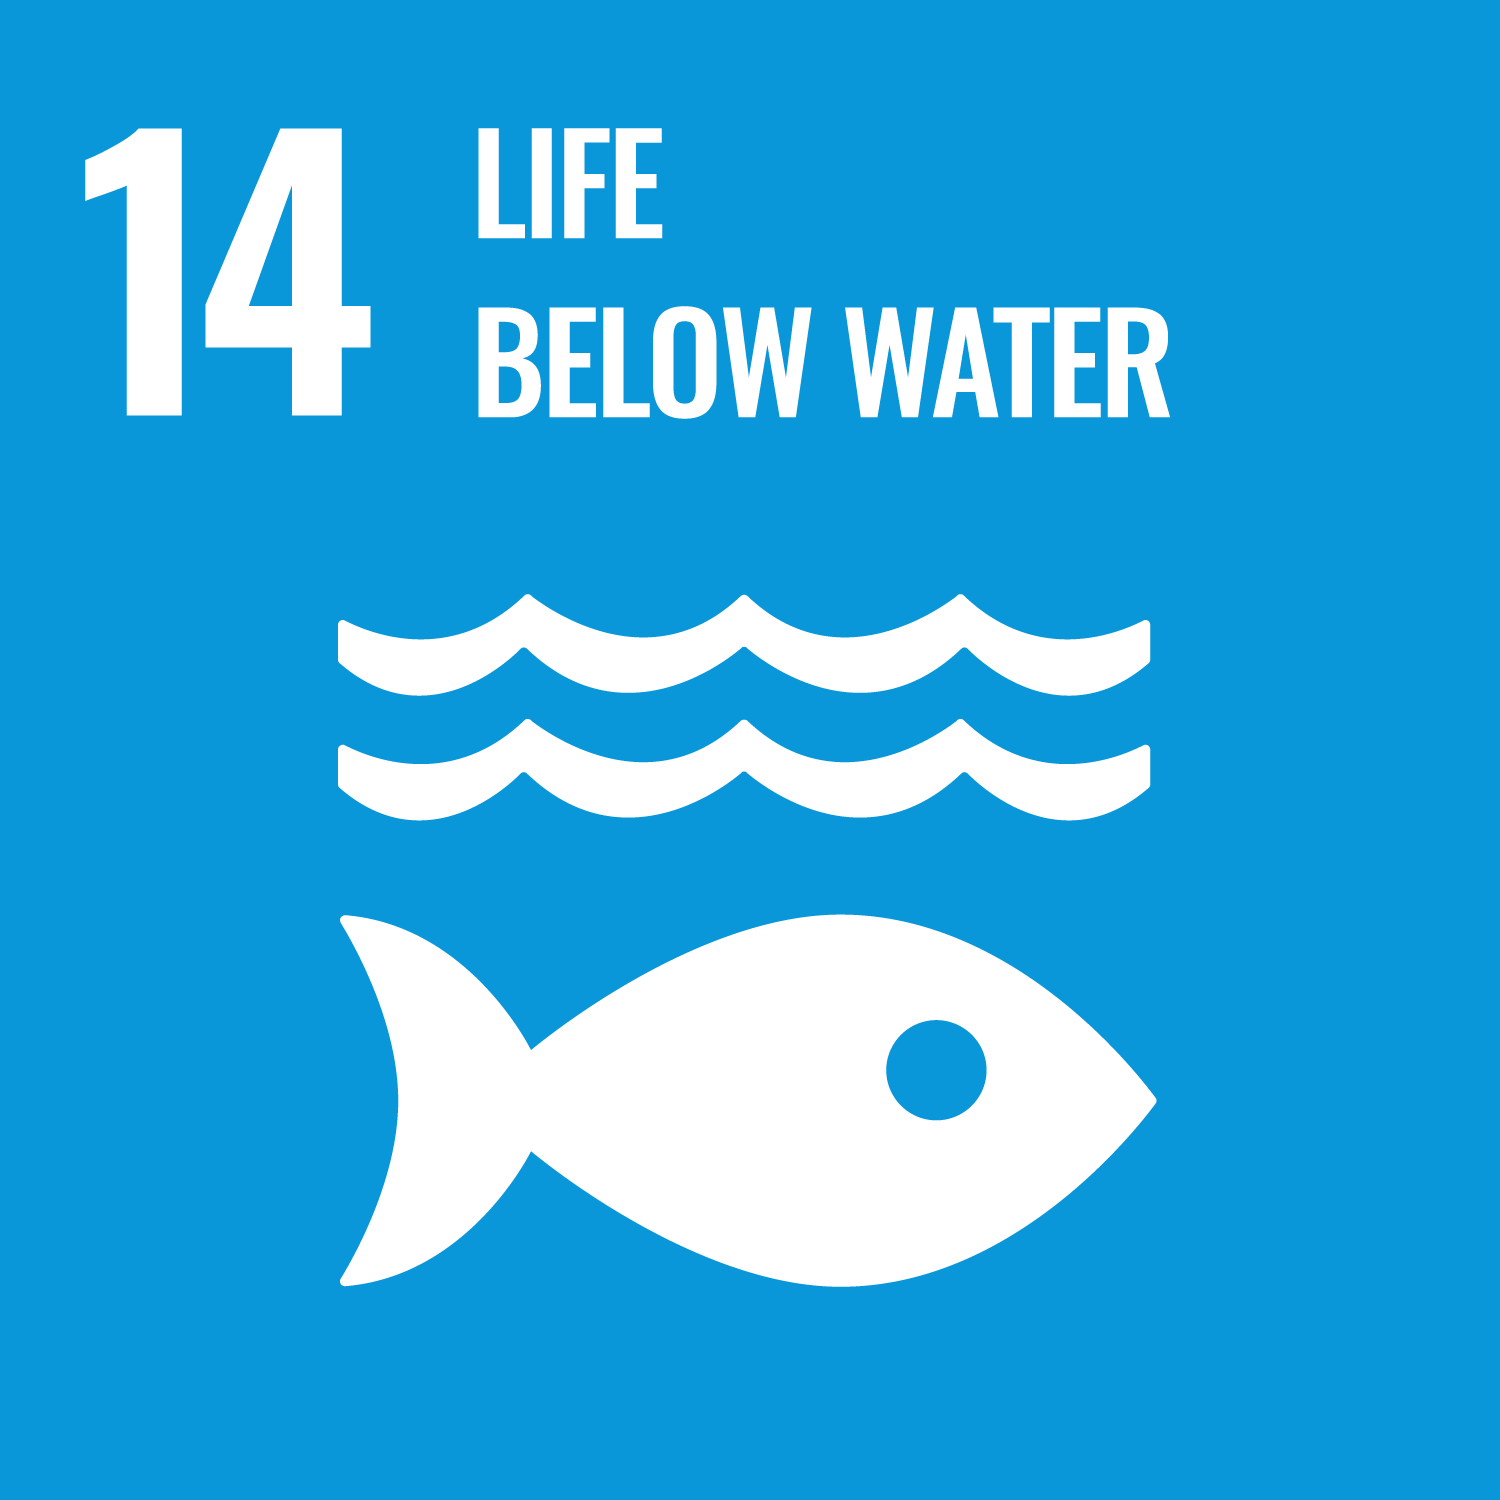 Goal Fourteen: Conserve and sustainably use the oceans, seas and marine resources for sustainable development